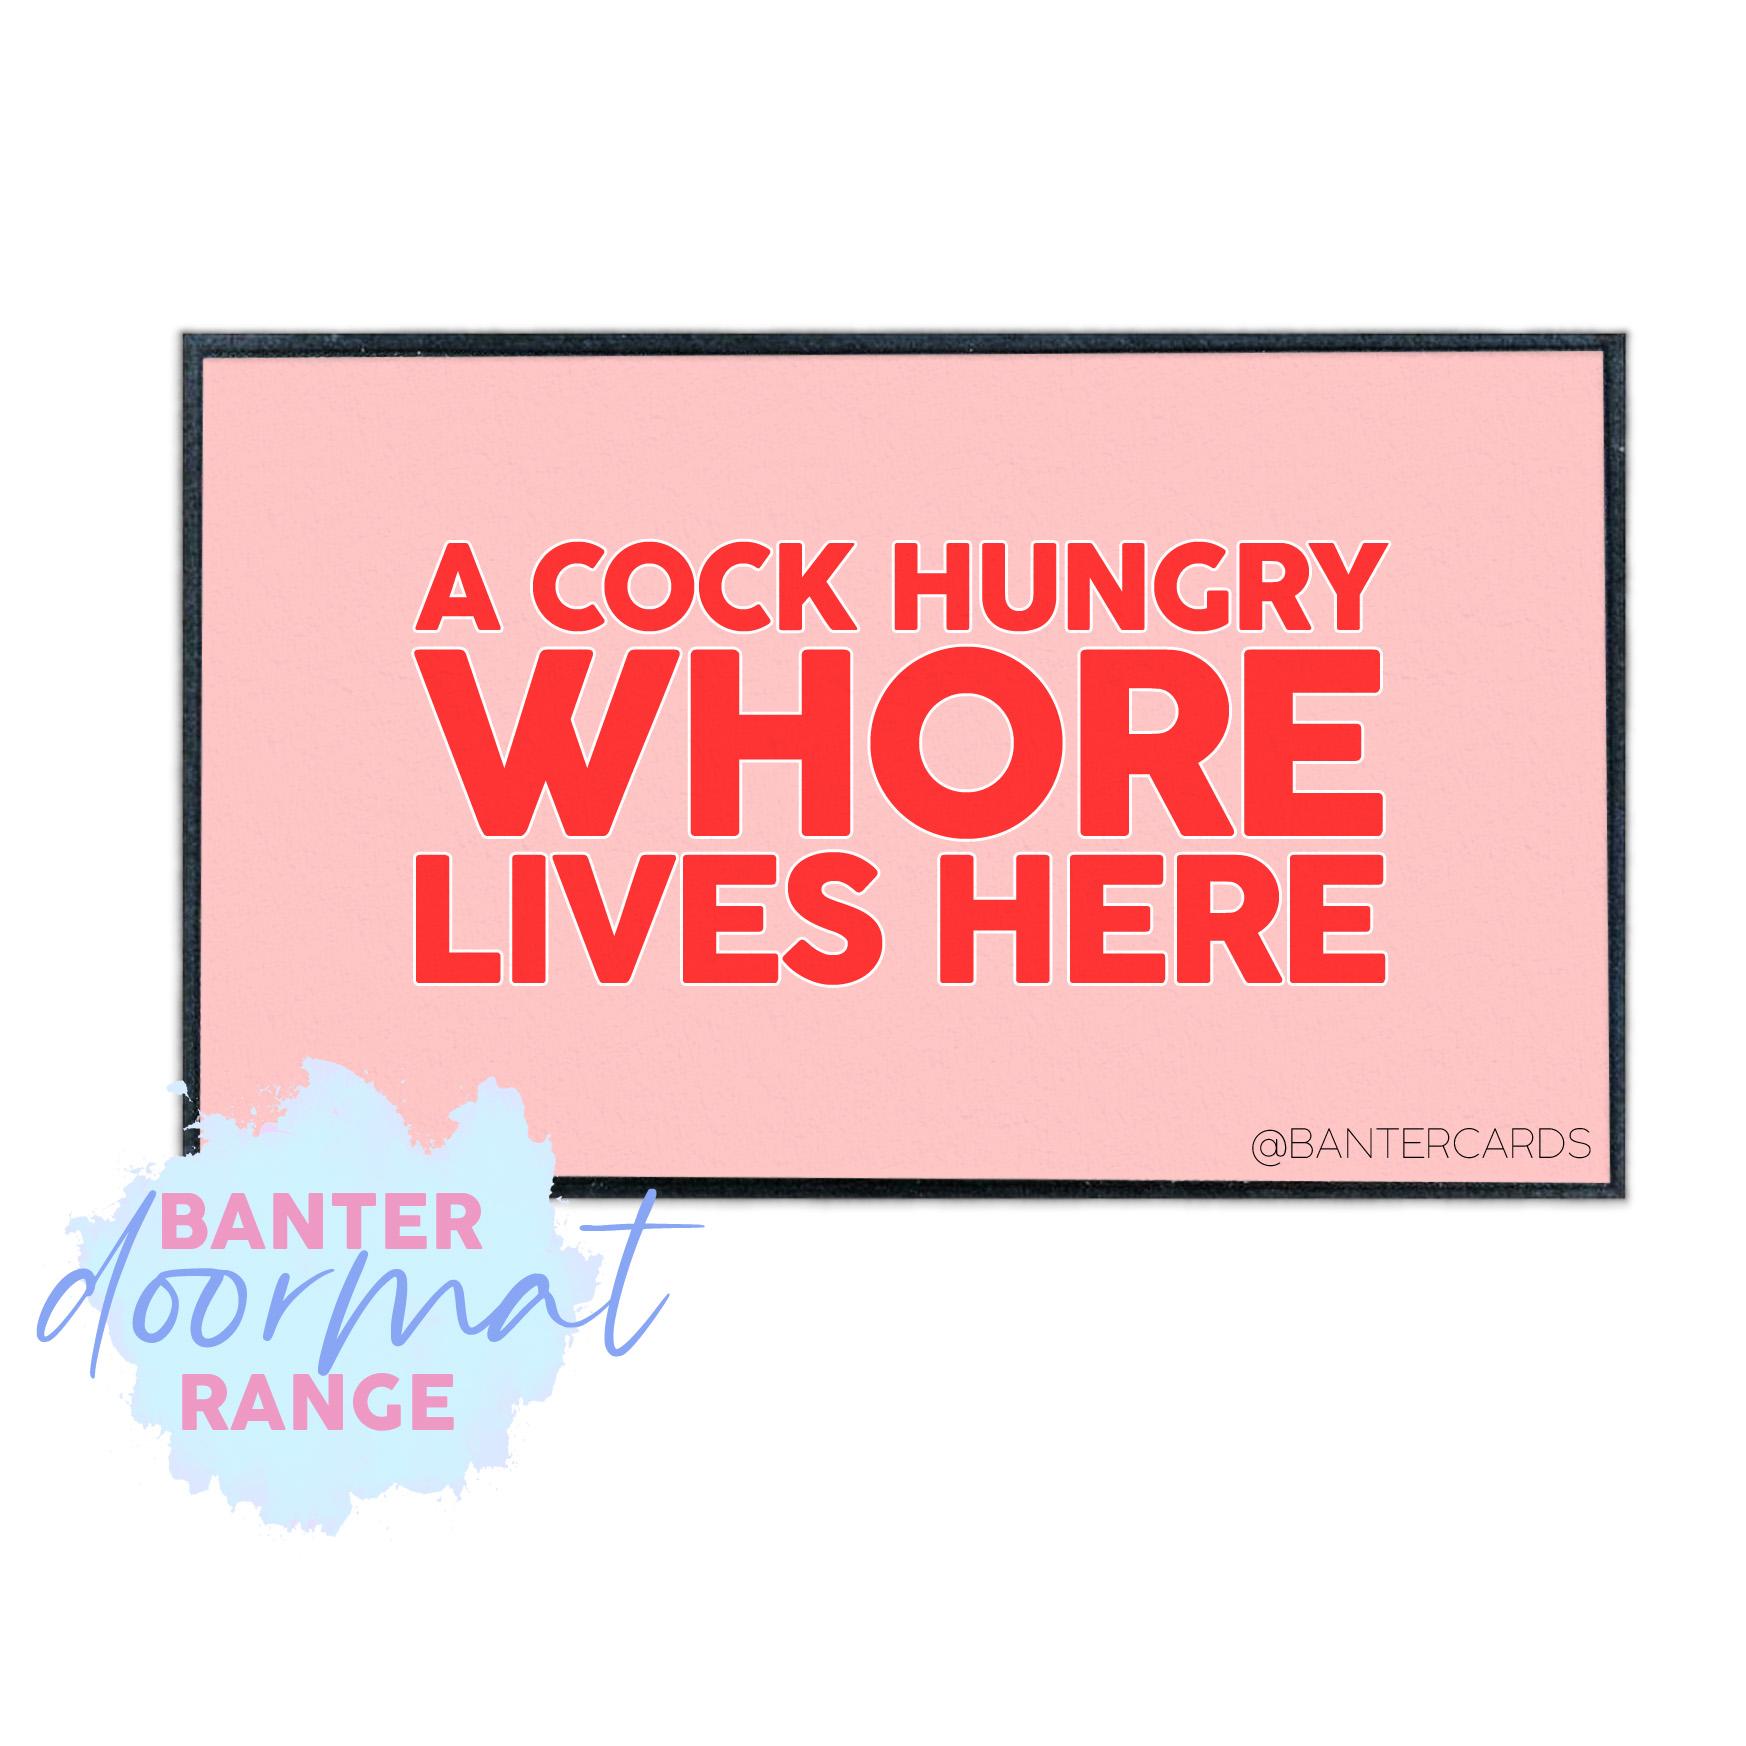 Cock hungry whore